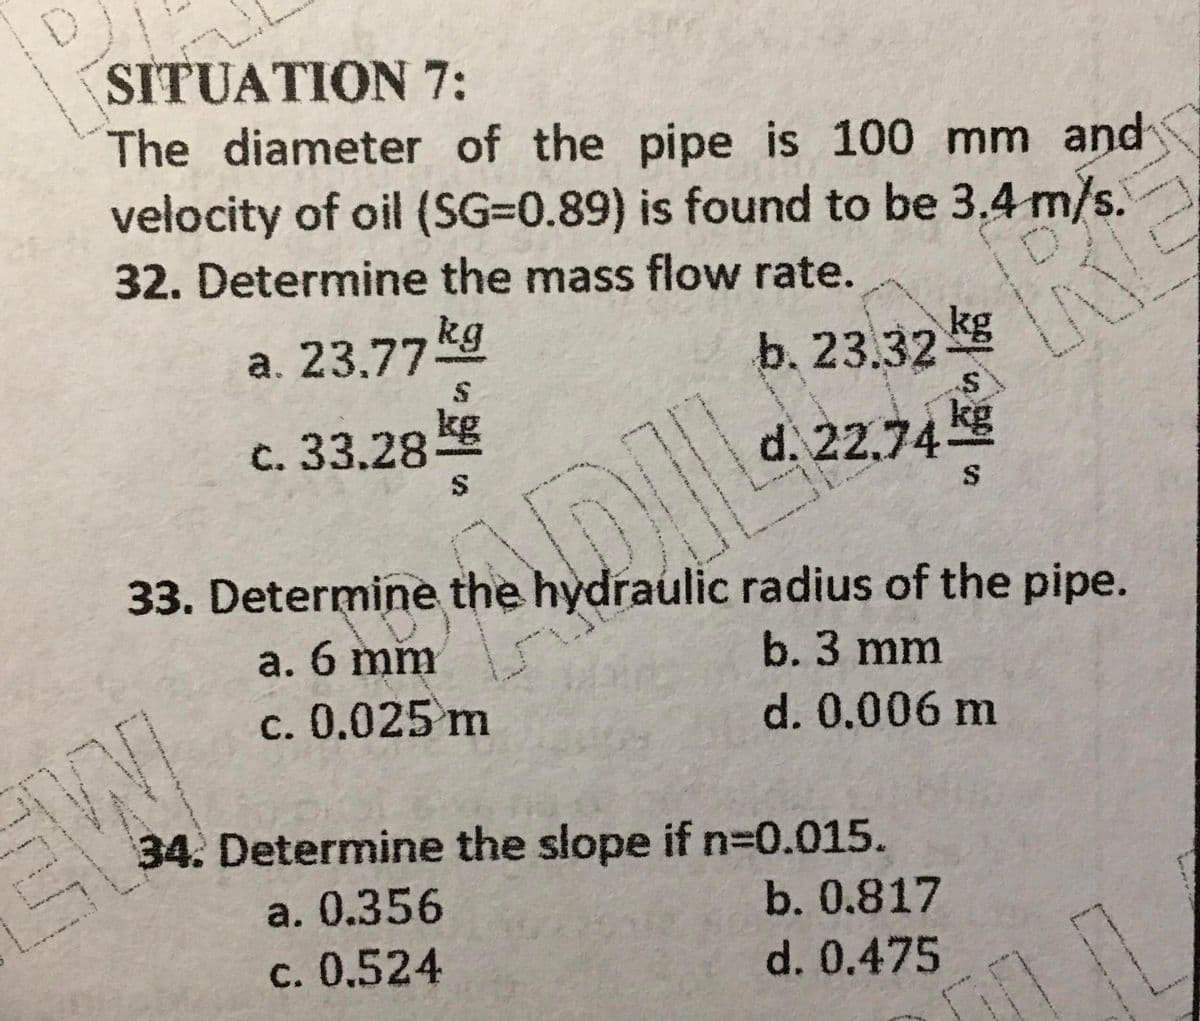 SITUATION 7:
The diameter of the pipe is 100 mm and
velocity of oil (SG=0.89) is found to be 3,4 m/s.
32. Determine the mass flow rate.
a. 23,77kg
b. 23.32
kg
c. 33.28 g
d. 22.74 Kg
33. Determine the hydraulic radius of the pipe.
a. 6 mm
b. 3 mm
c. 0.025 m
d. 0.006 m
34. Determine the slope if n30.015.
a. 0.356
b. 0.817
c. 0.524
d. 0.475
